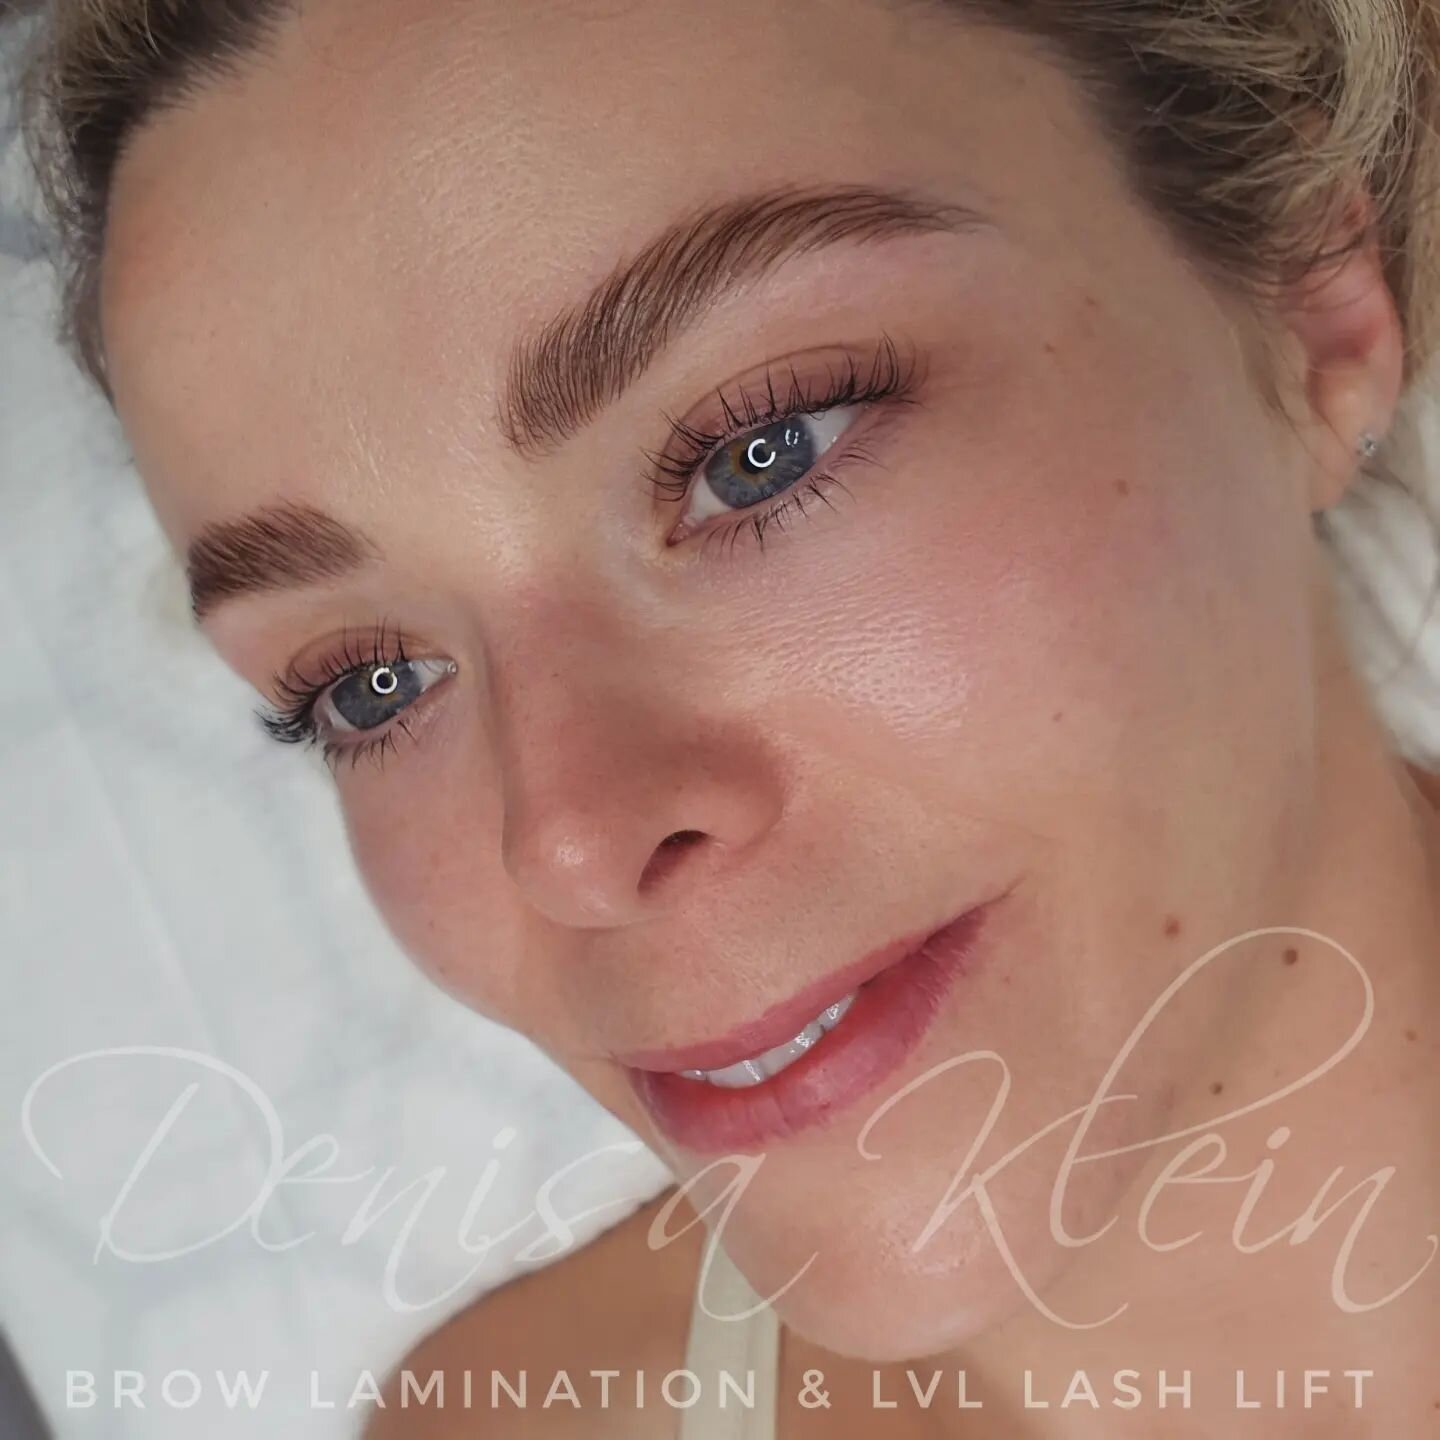 Combination of BROW LAMINATION &amp; LVL LASH LIFT - swipe to see before and after picture 

Brow Lamination also known as brow sculpt or fluffy brows is currently one of the biggest brow trends lasting 6 to 8 weeks 👌
.
This treatment is suitable fo